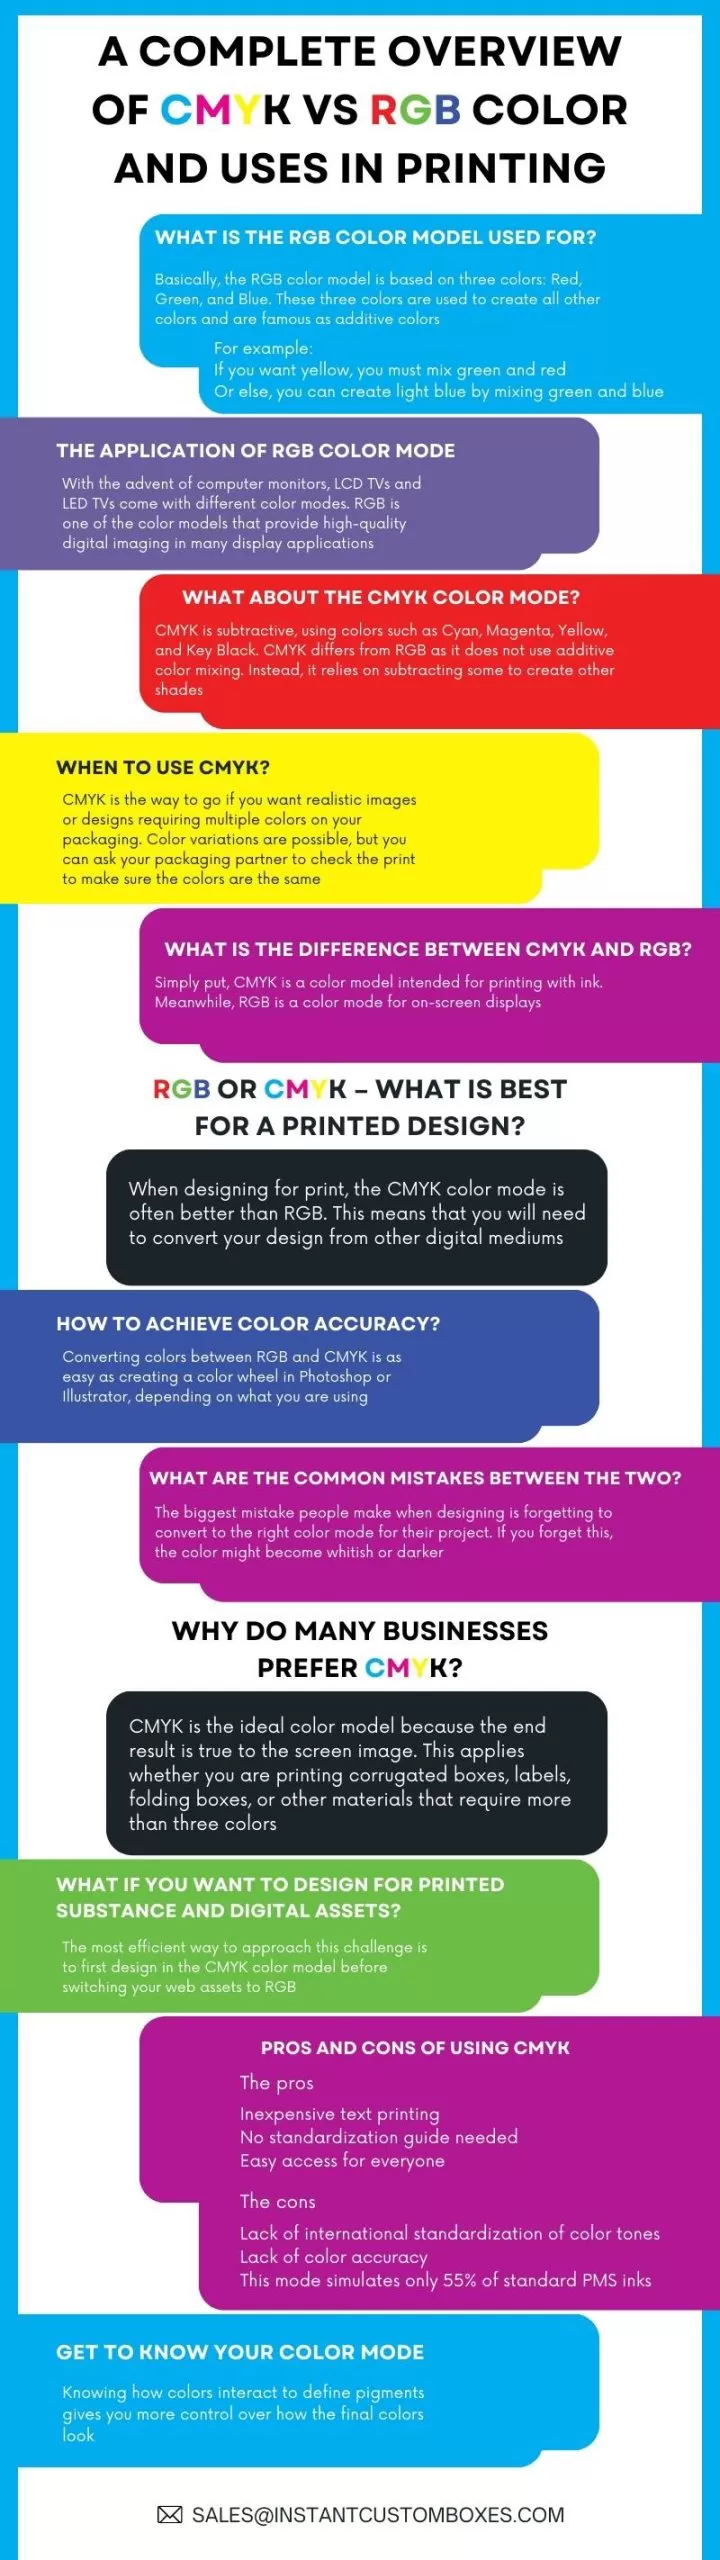 A-Complete-Overview-of-CMYK-vs-RGB-Color-and-Uses-in-Printing-1